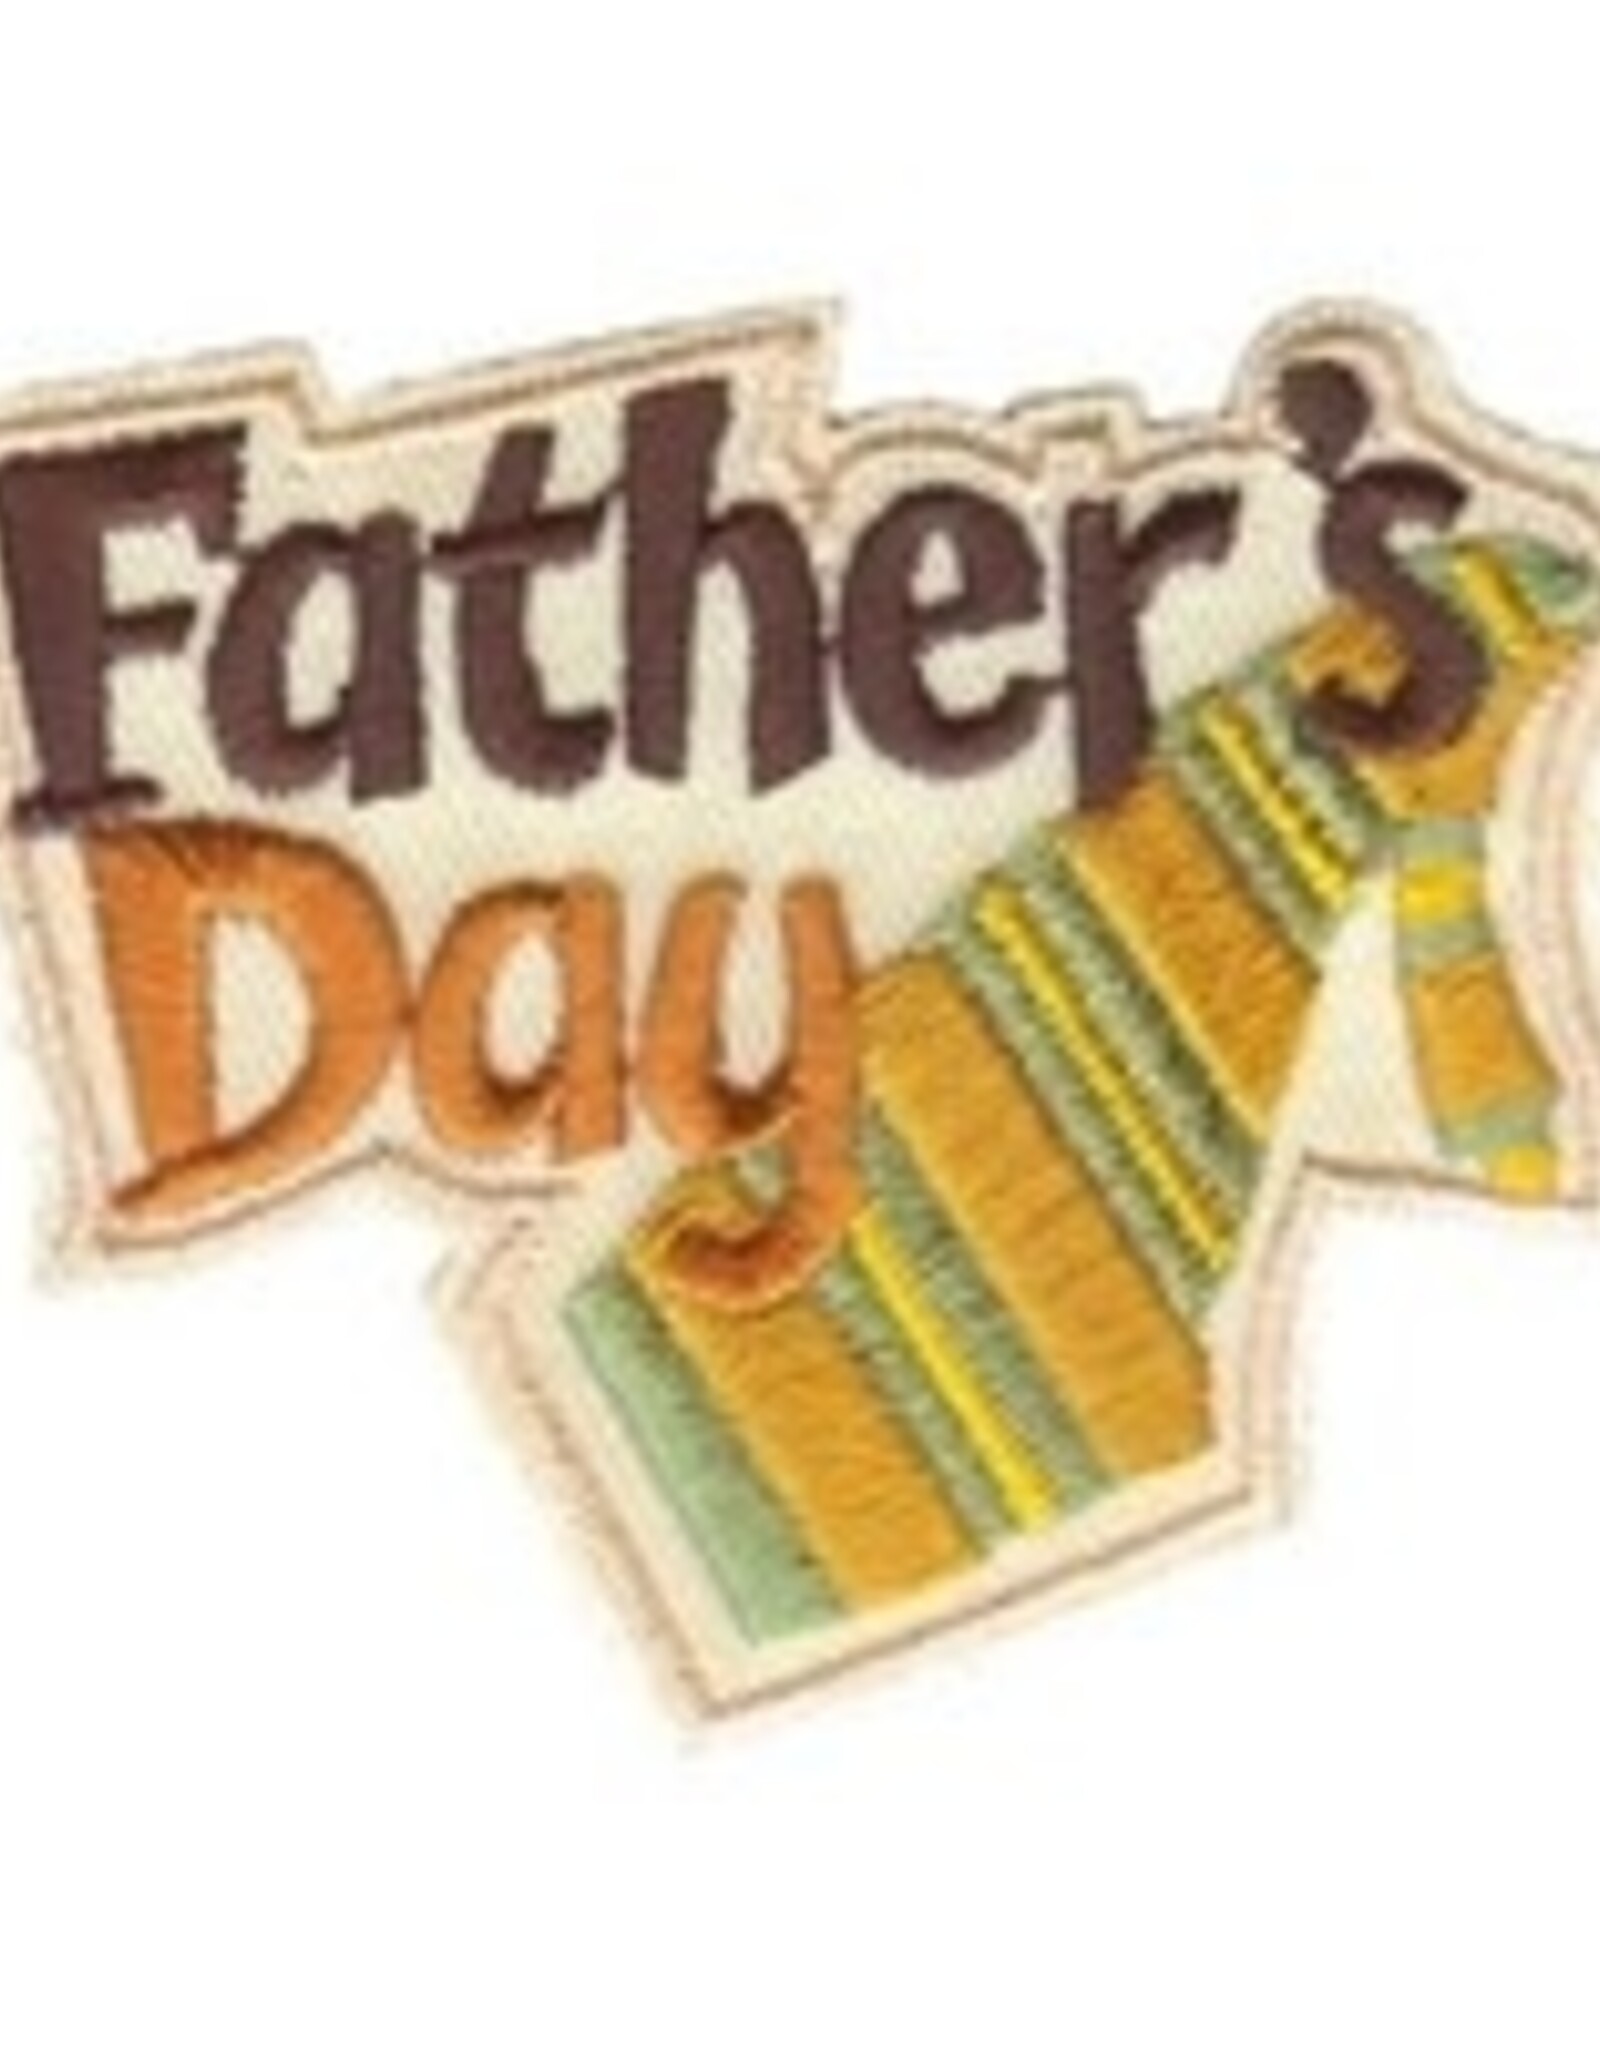 Father's Day Tie Fun Patch